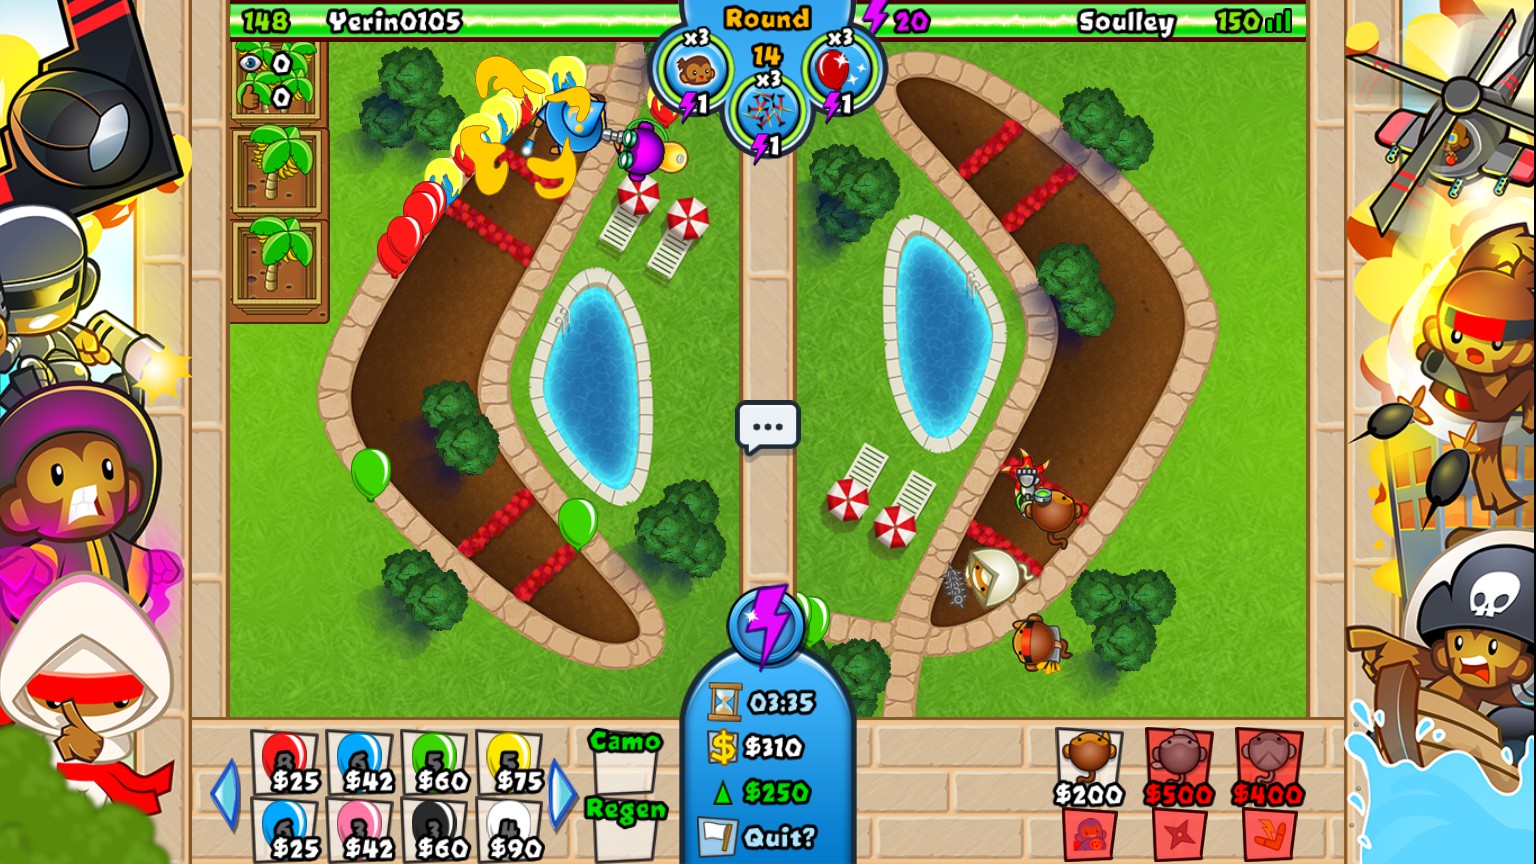 Bloons TD Battles How to Win in Game Strategy Guide - 1. Placement - F4F6713